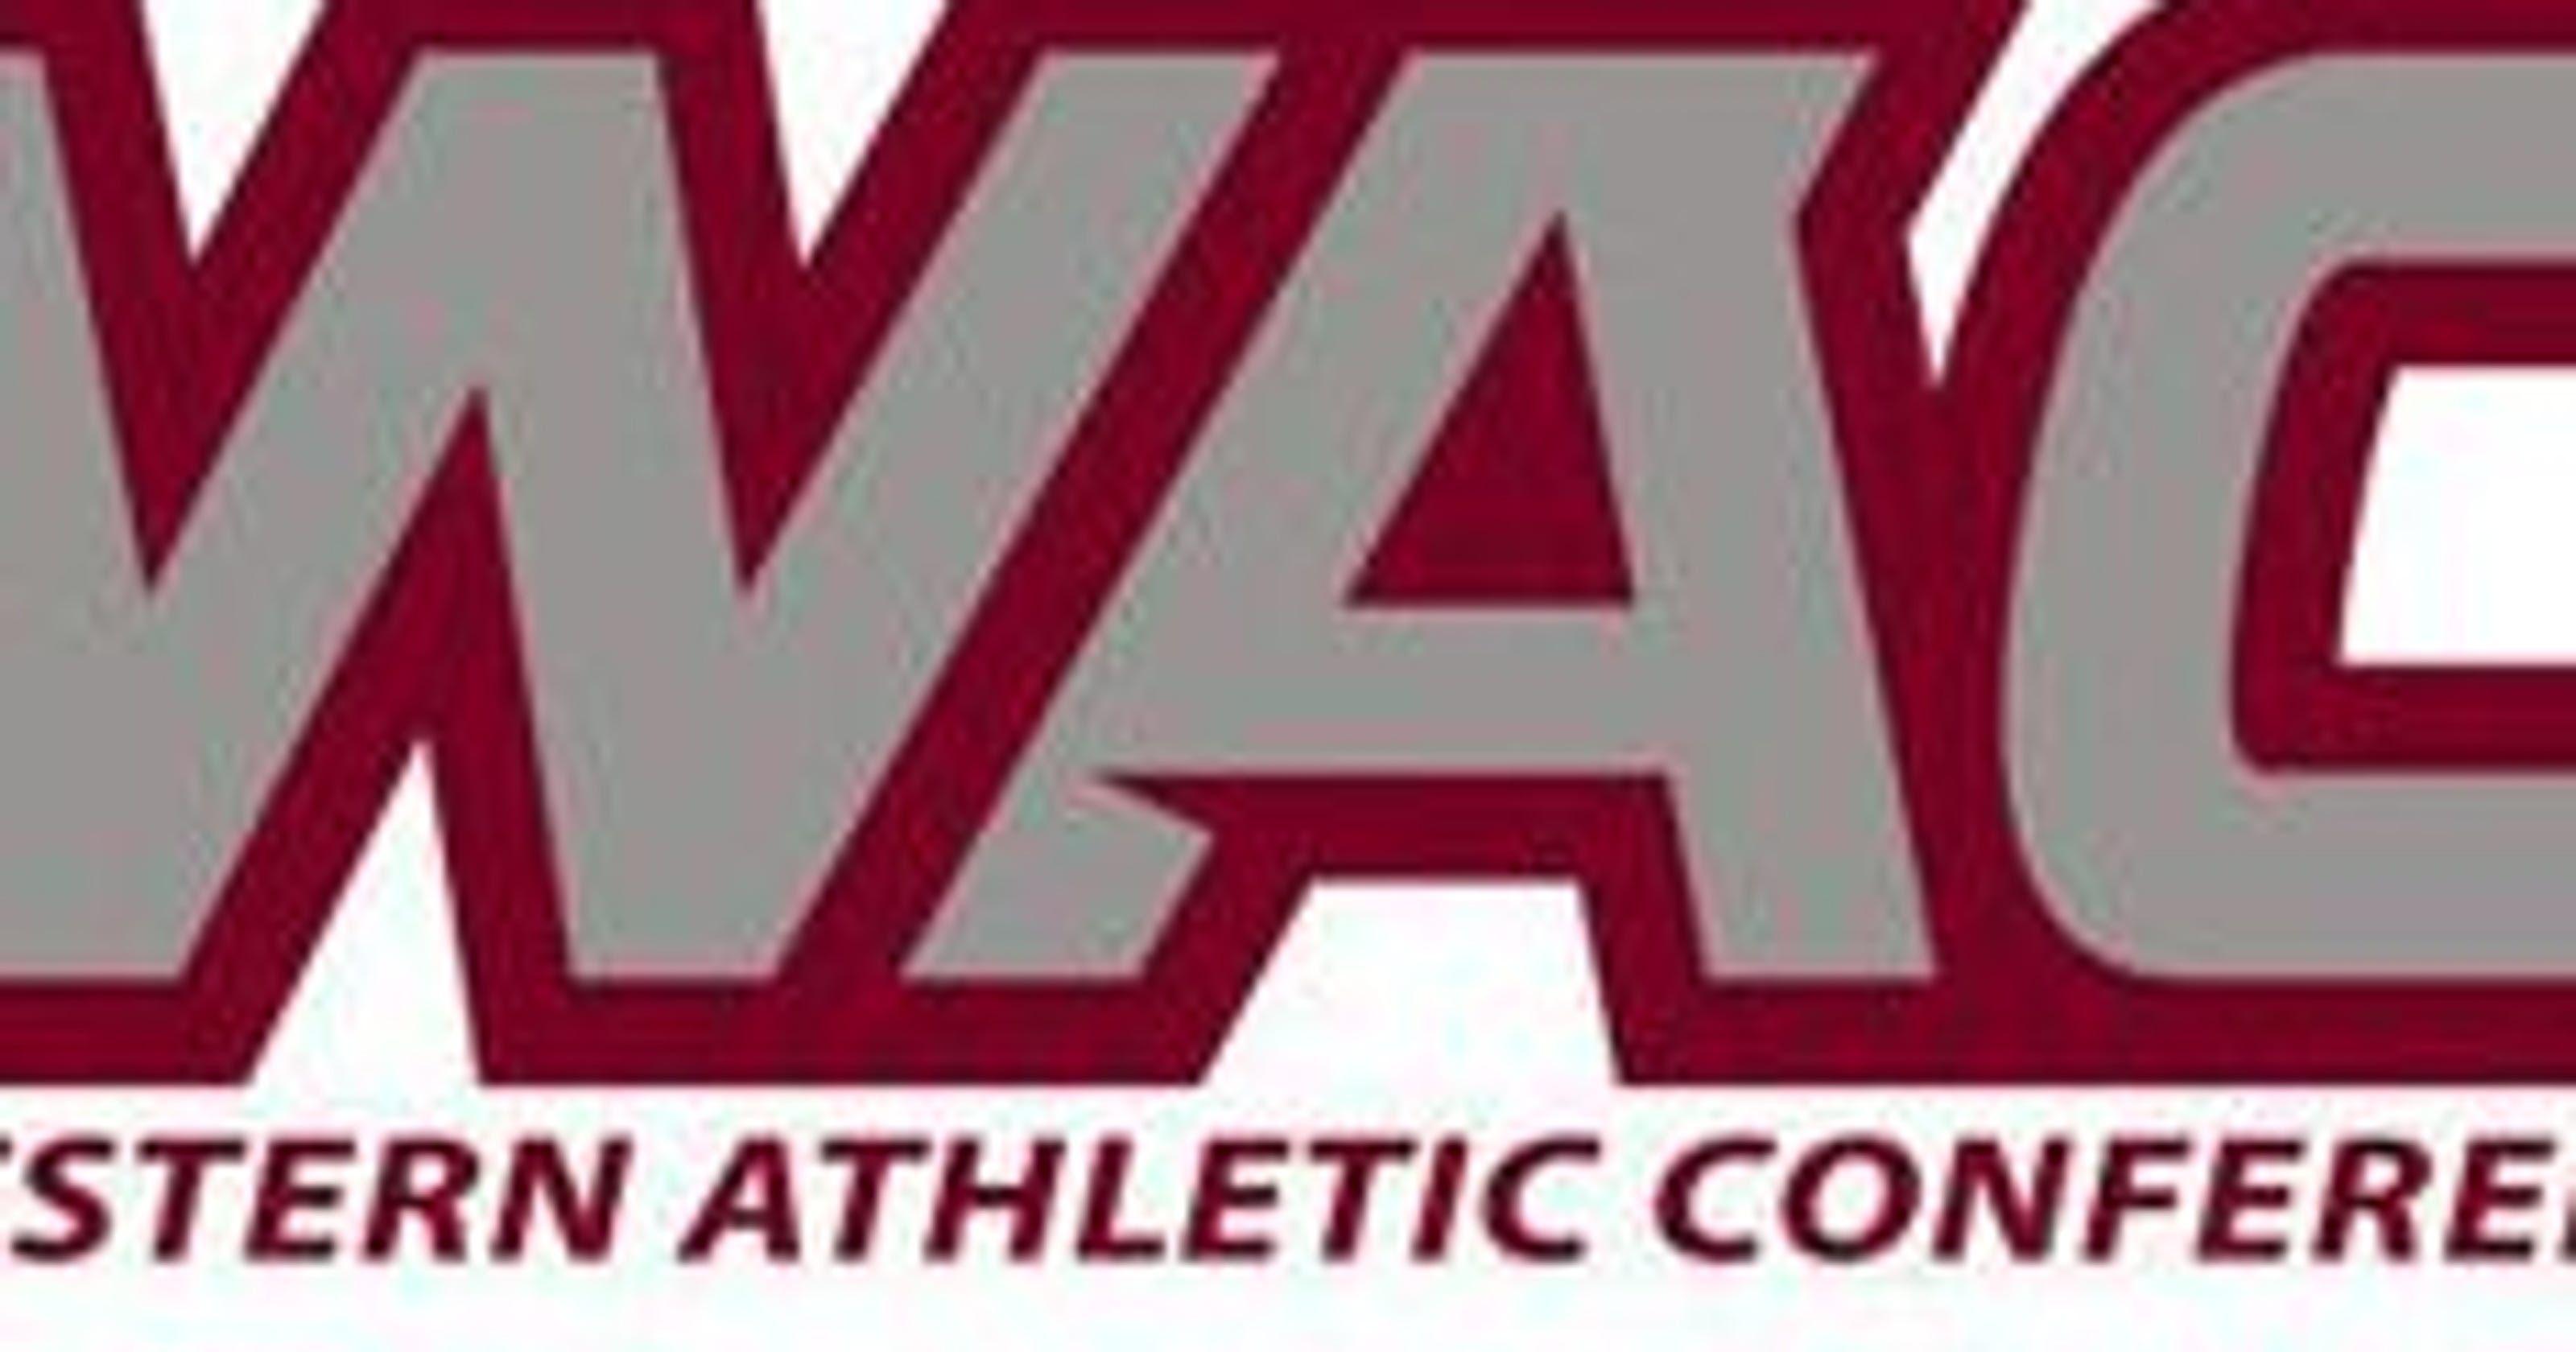 WAC Logo - Cal Baptist To Join WAC In 2018 19 As League's 9th Member